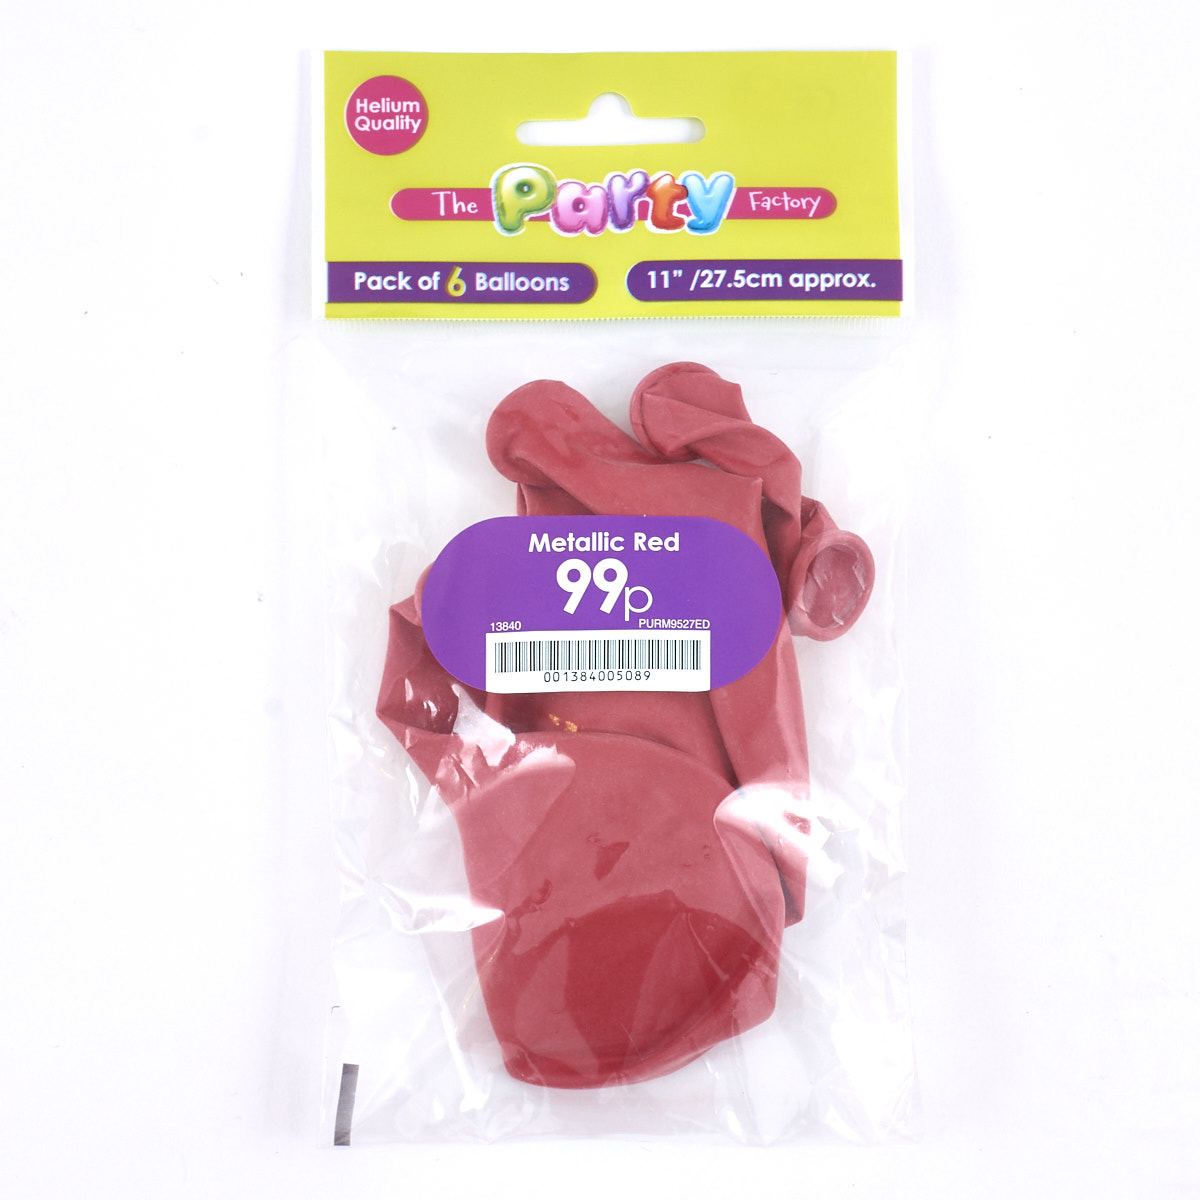 Metallic Red Air-fill Latex Balloons - Pack Of 6